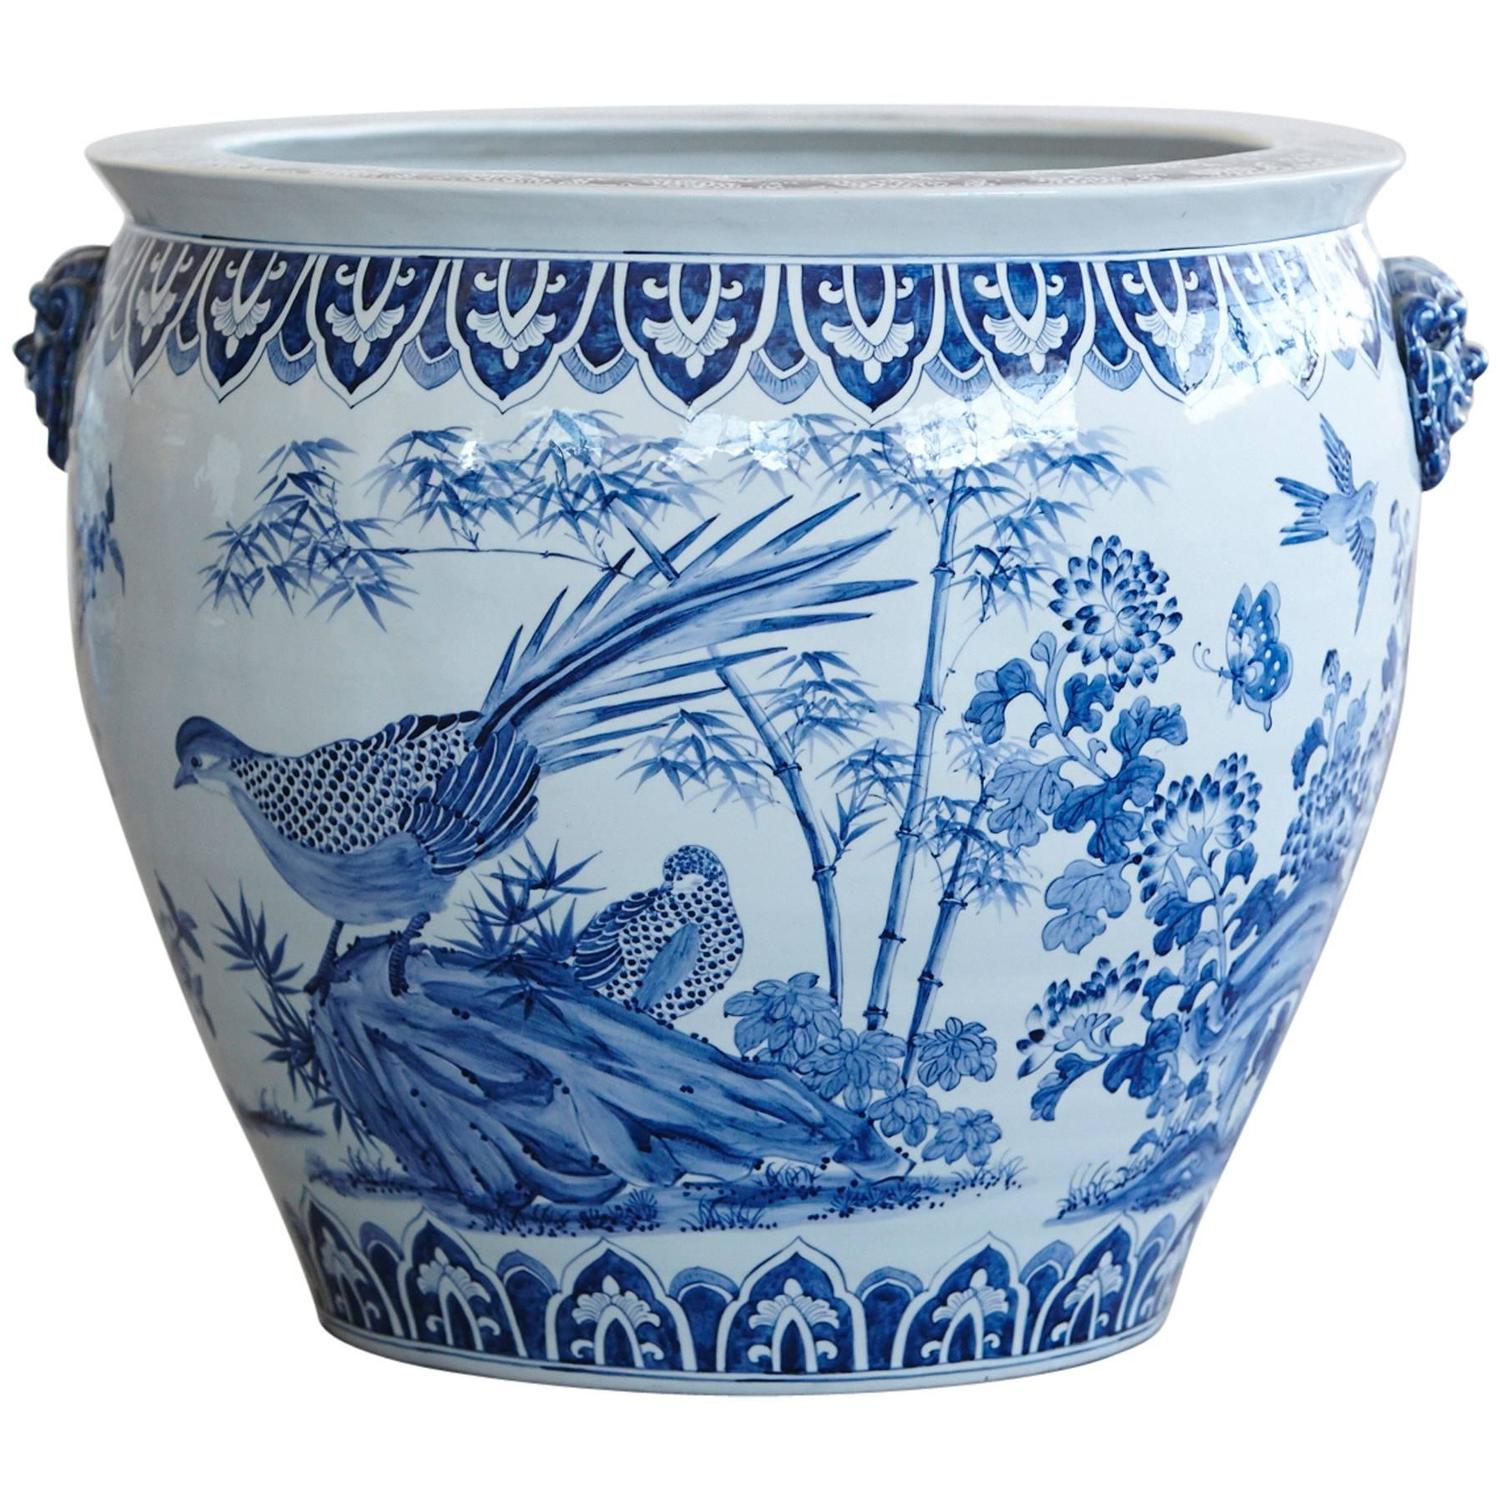 Large Chinese Blue and White Porcelain Jardinière or Planter at 1stdibs
